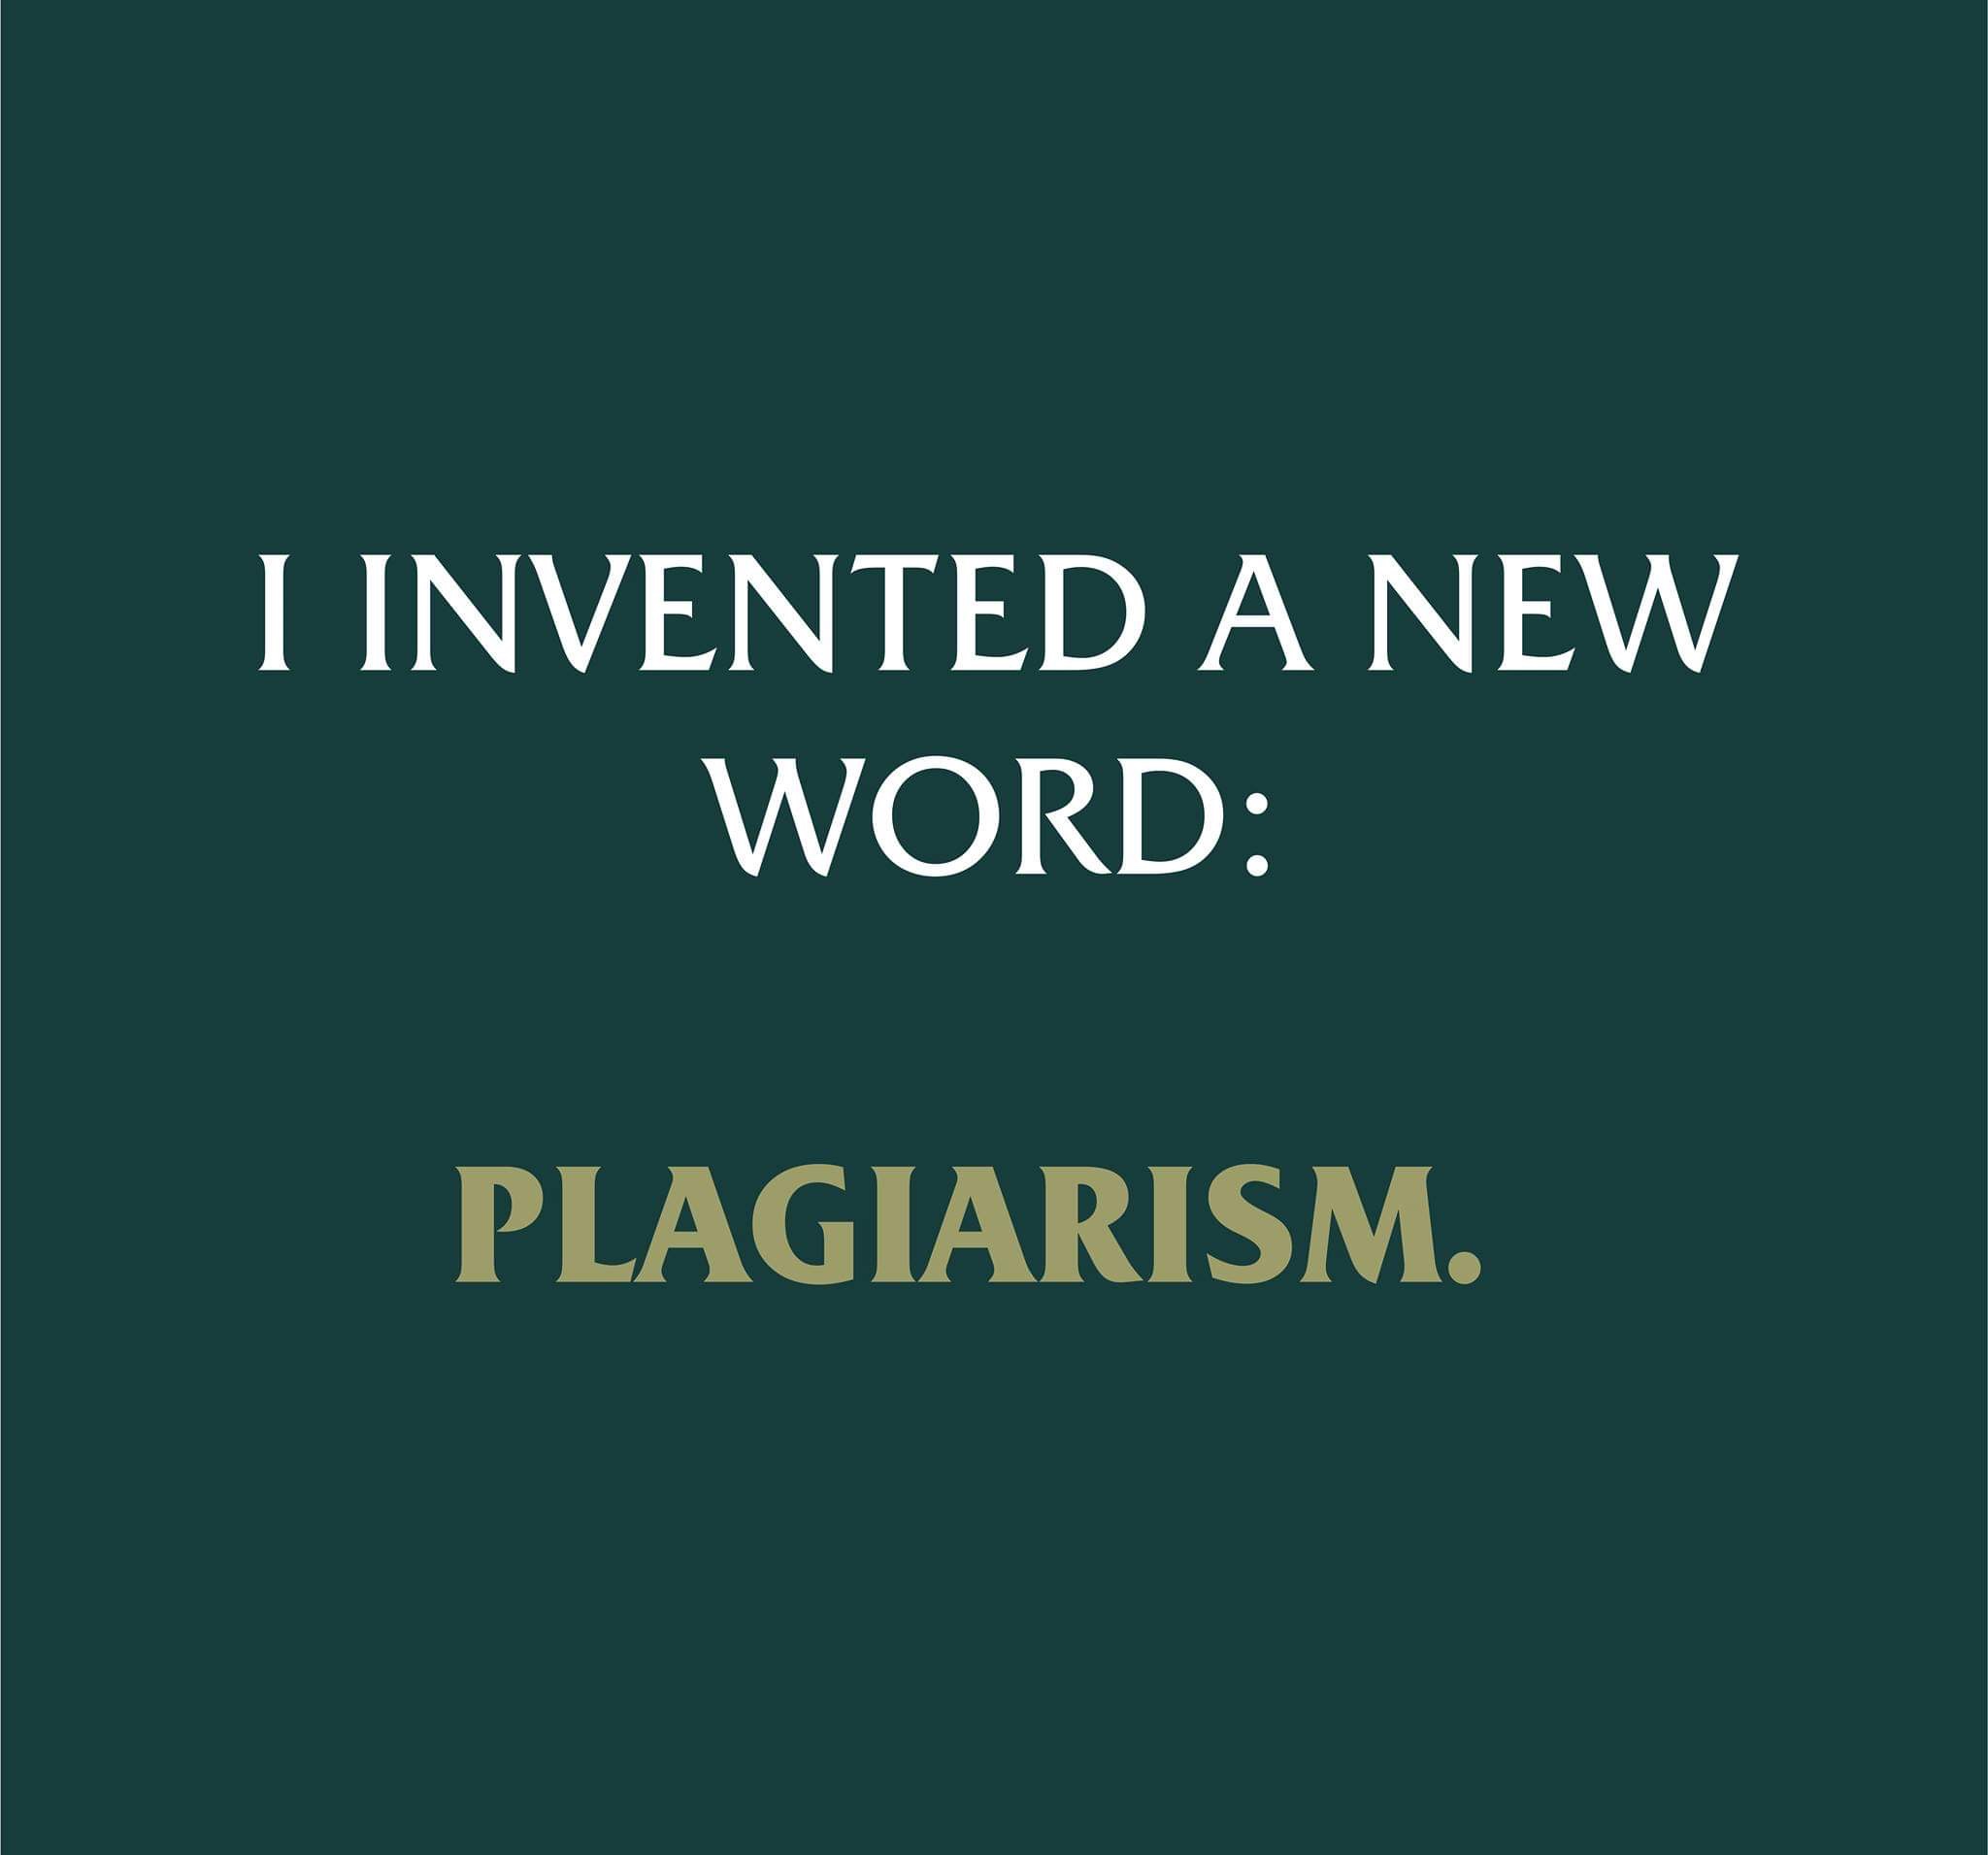 graphics - I Invented A New Word Plagiarism.